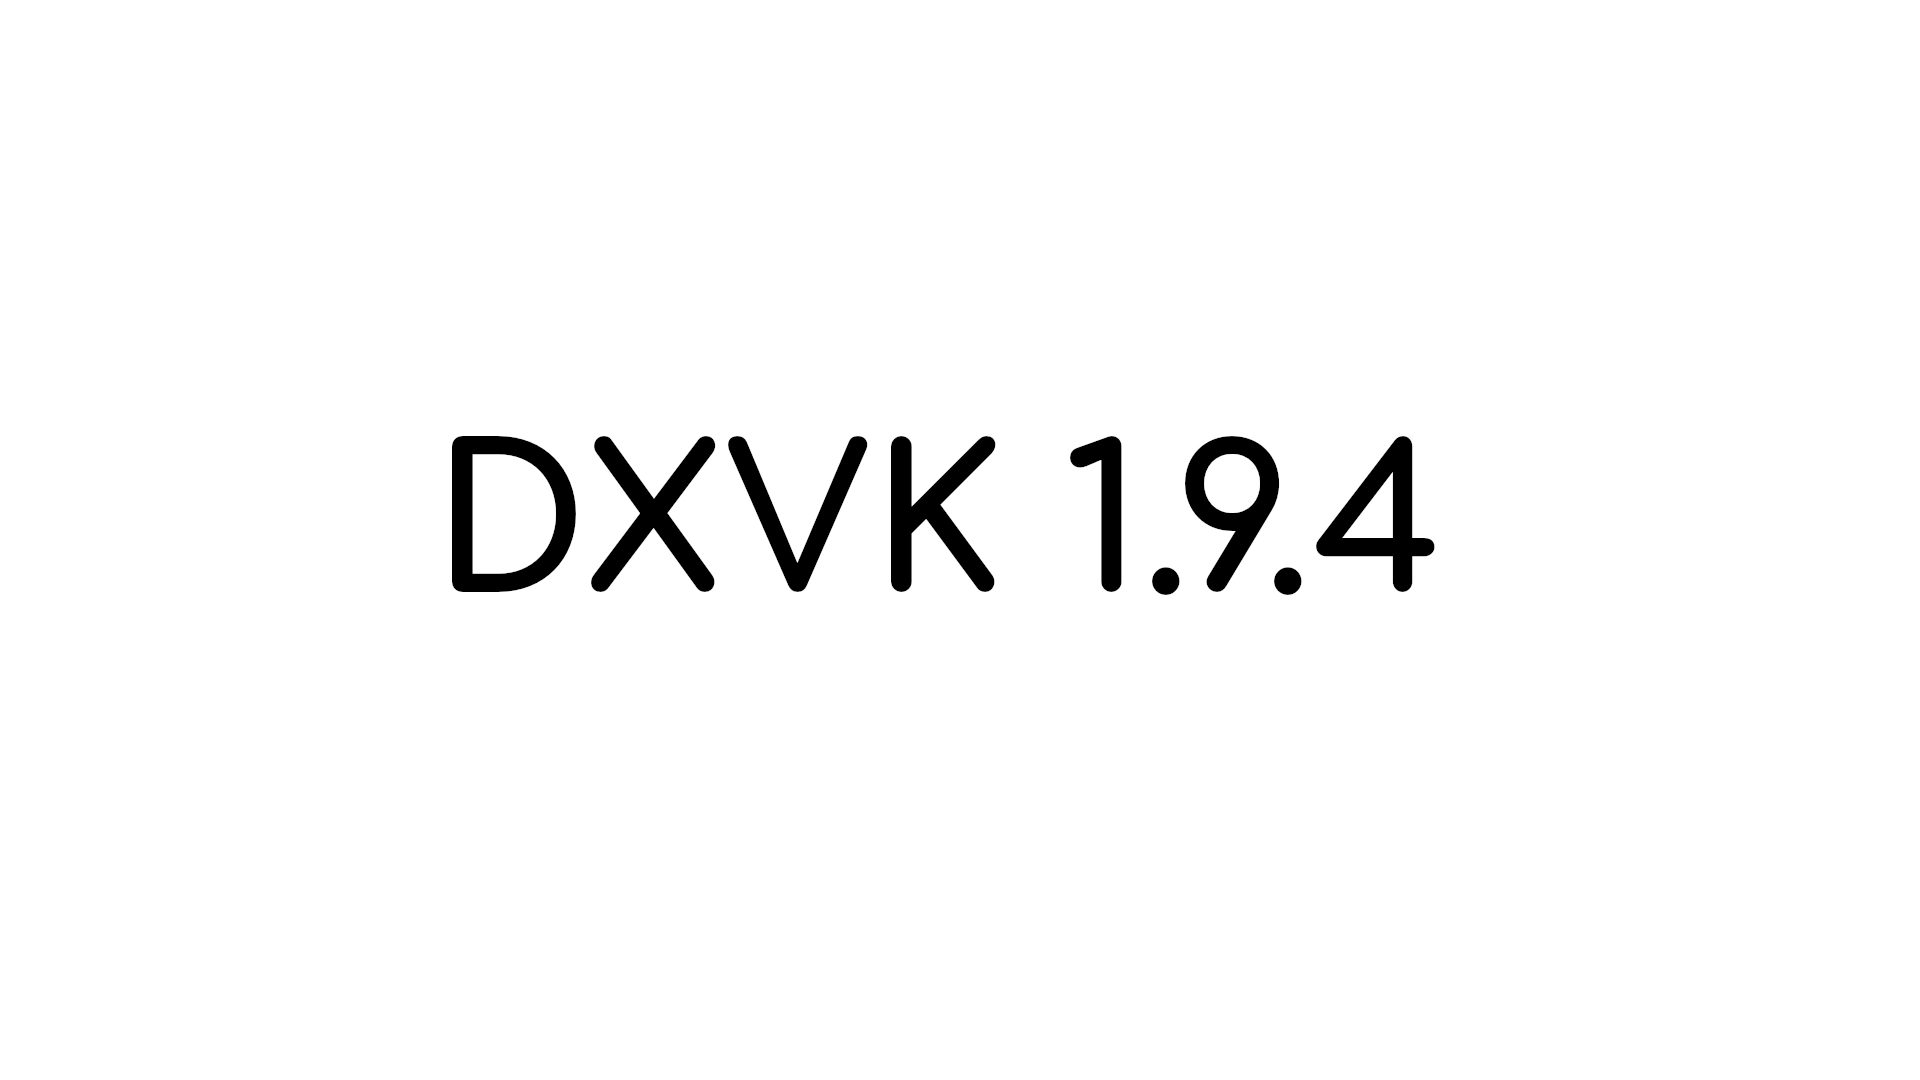 DXVK 1.9.4 Enables Performance Optimizations and DLSS Support for God of War